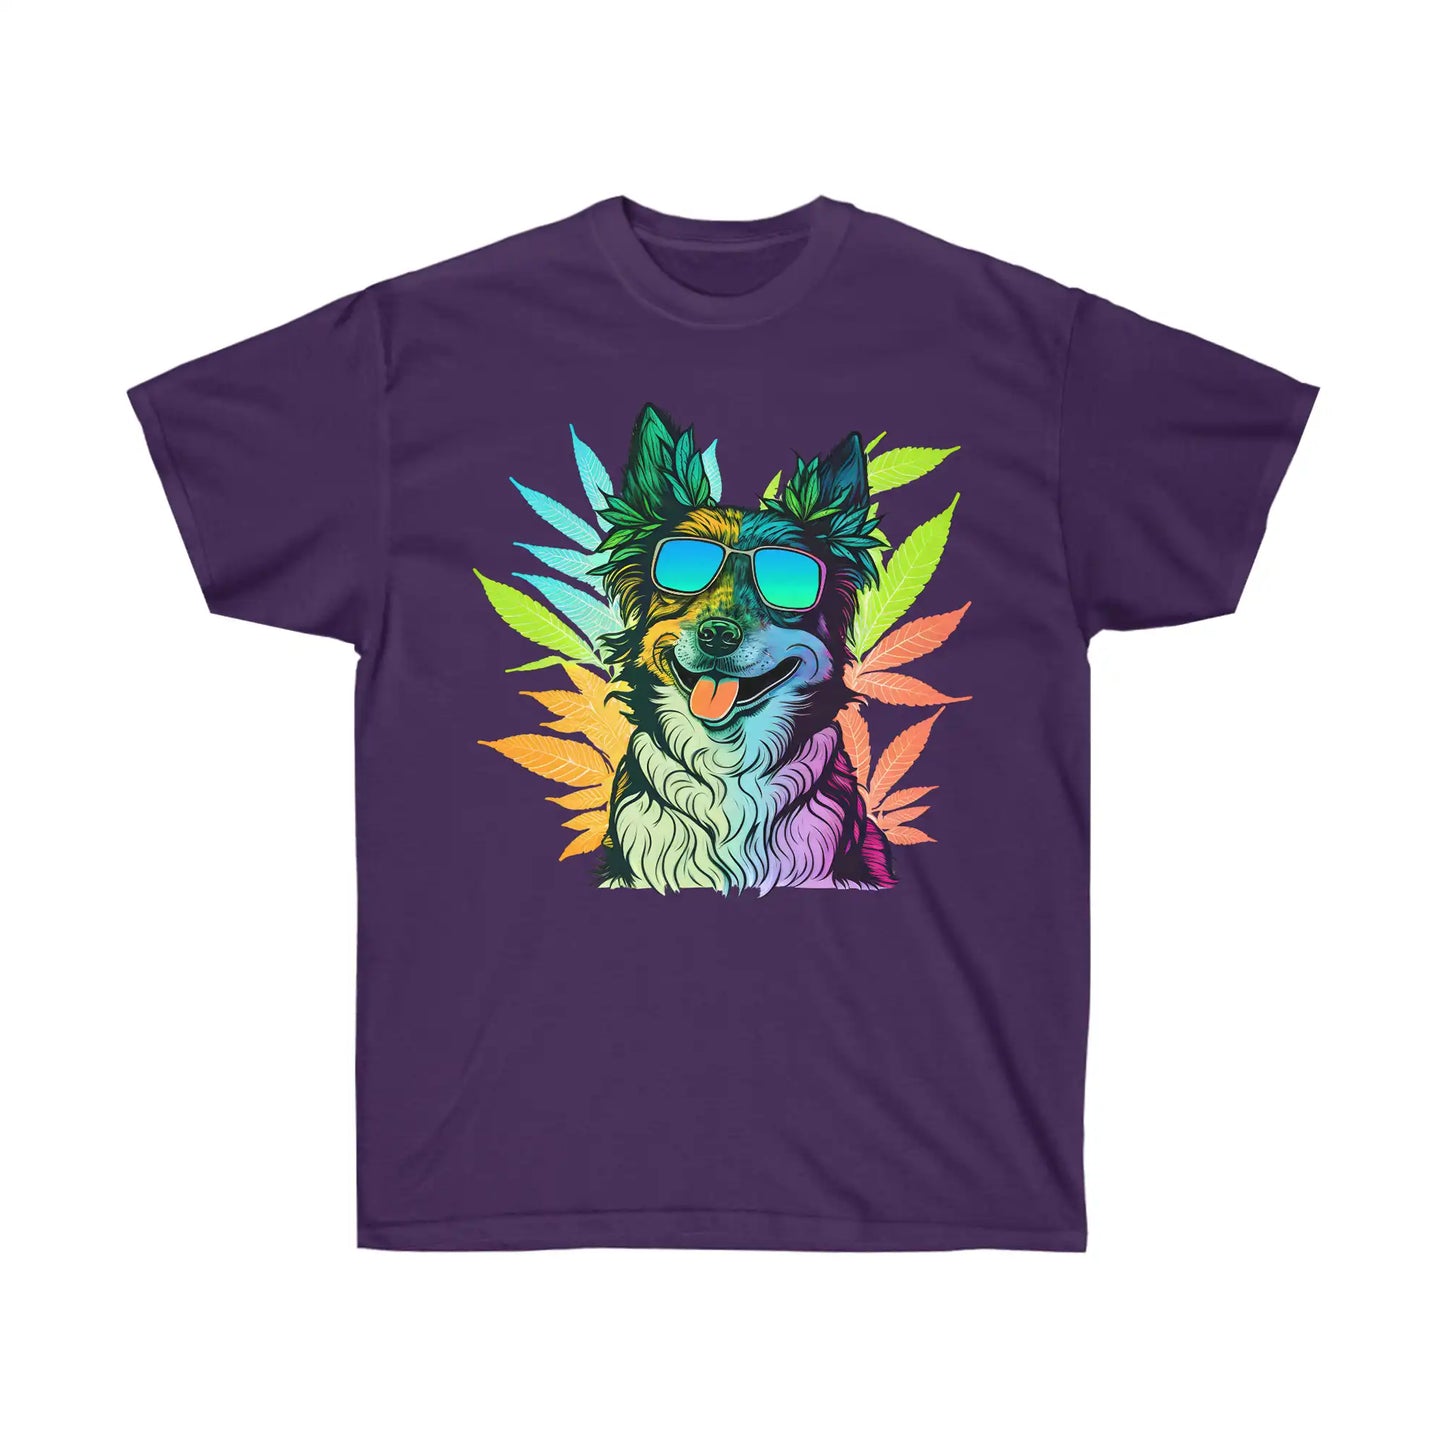 Cool Border Collie with shades surrounded by cannabis on a purple weed tshirt